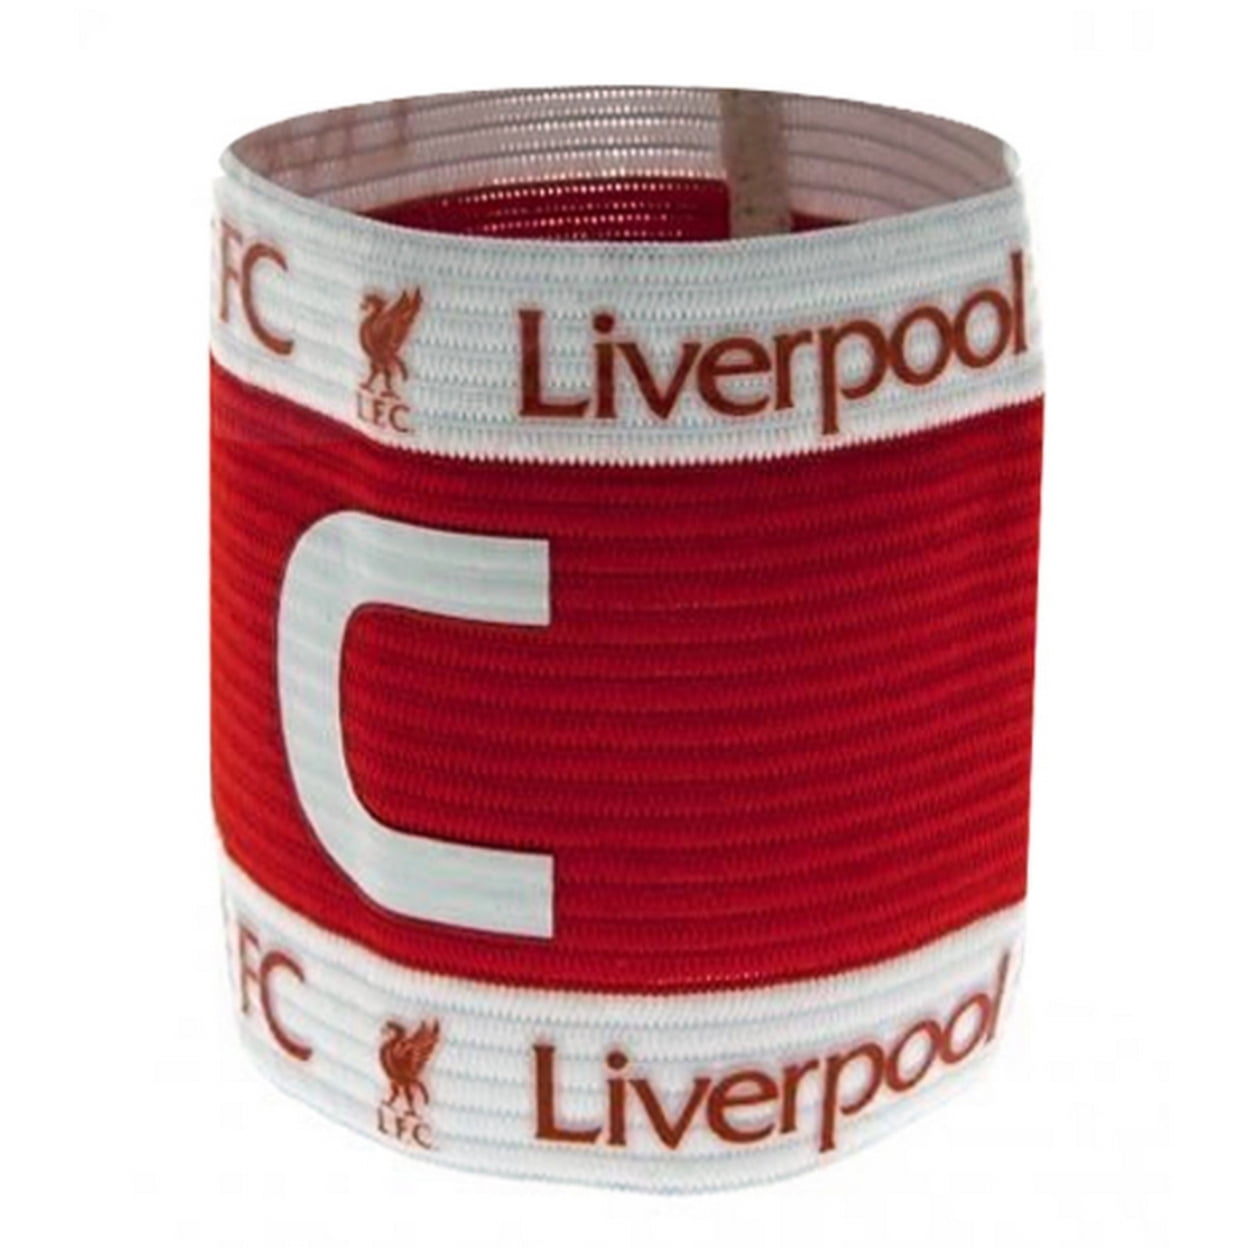 Liverpool FC Official Crested Captains Armband One Size Fits All